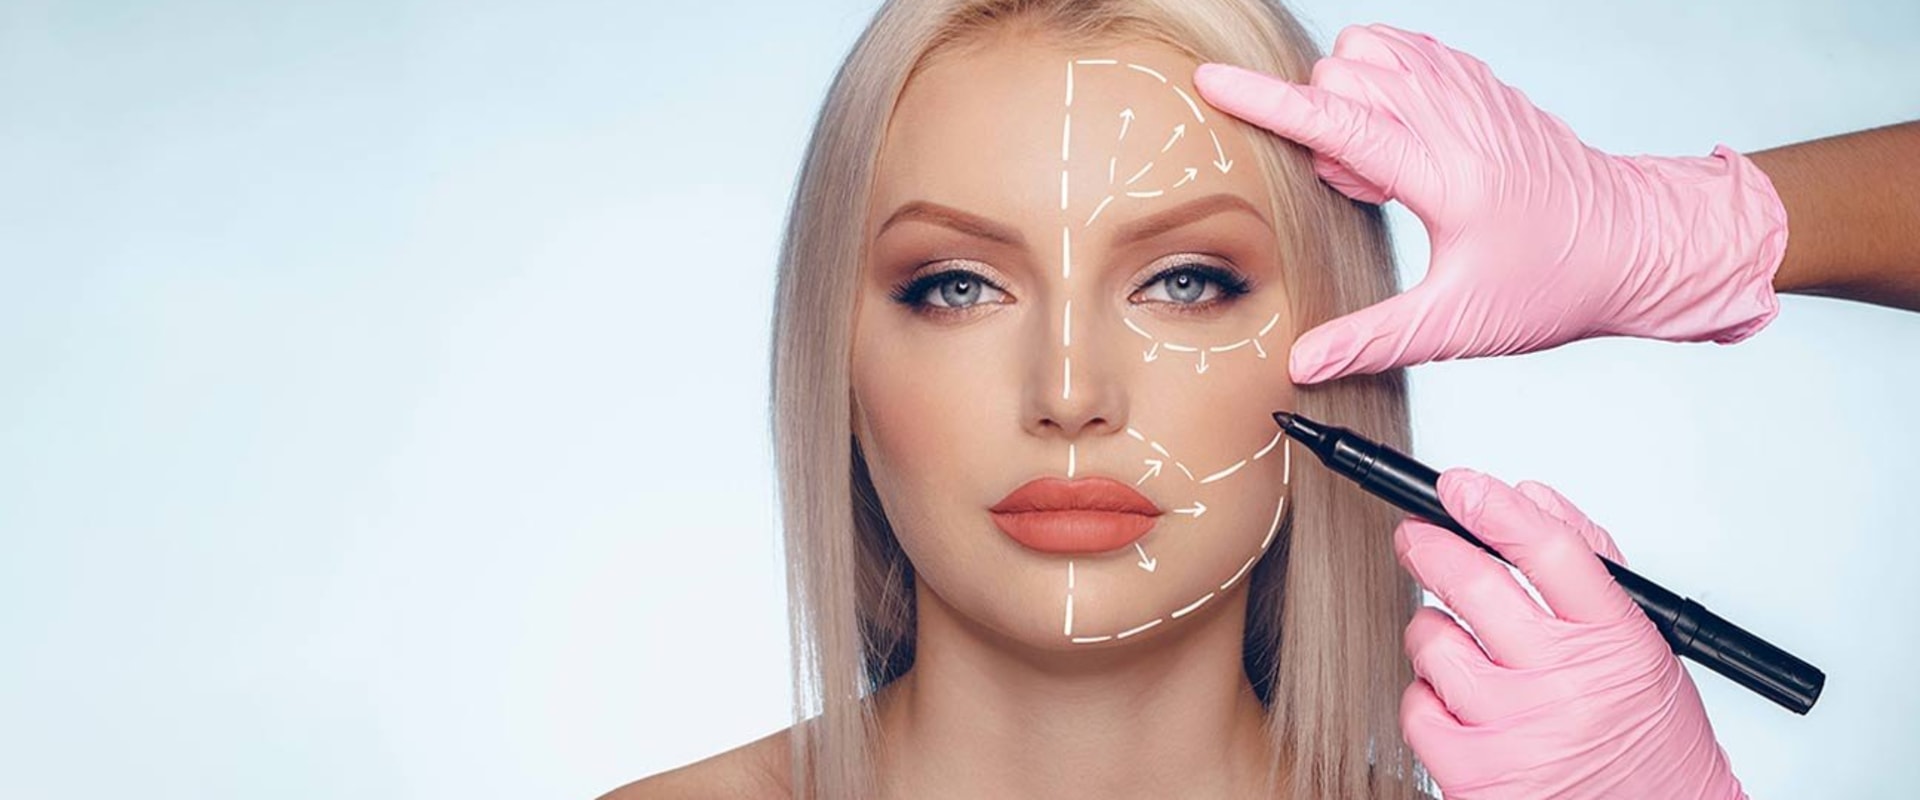 The Power of Plastic Surgery: How It Can Improve Mental Health